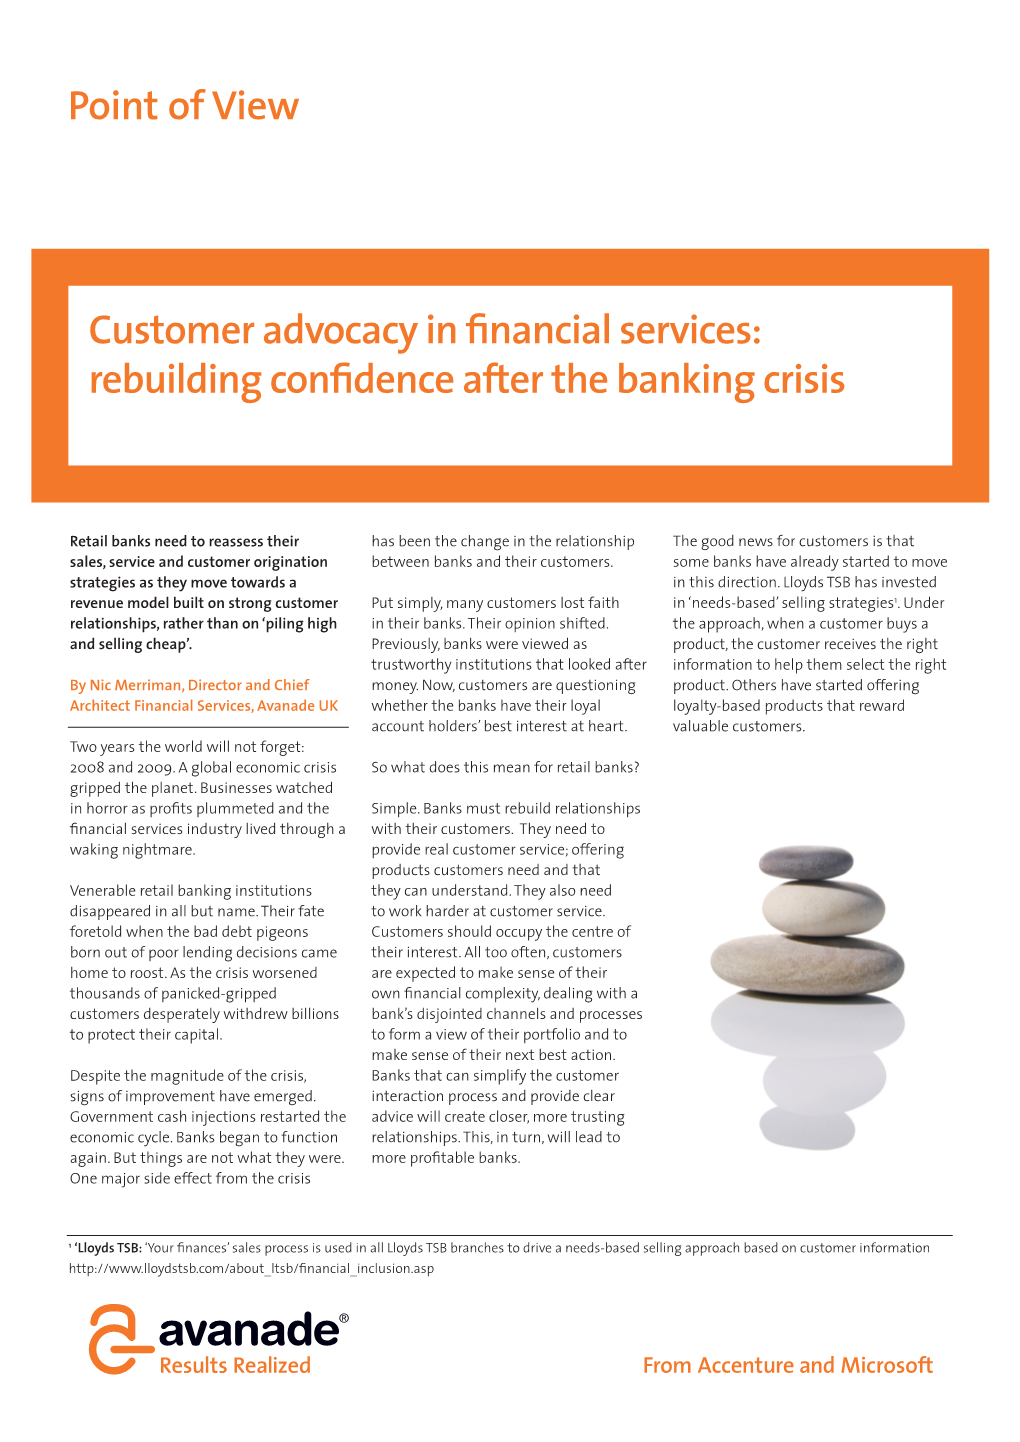 Point of View Customer Advocacy in Financial Services: Rebuilding Confidence After the Banking Crisis